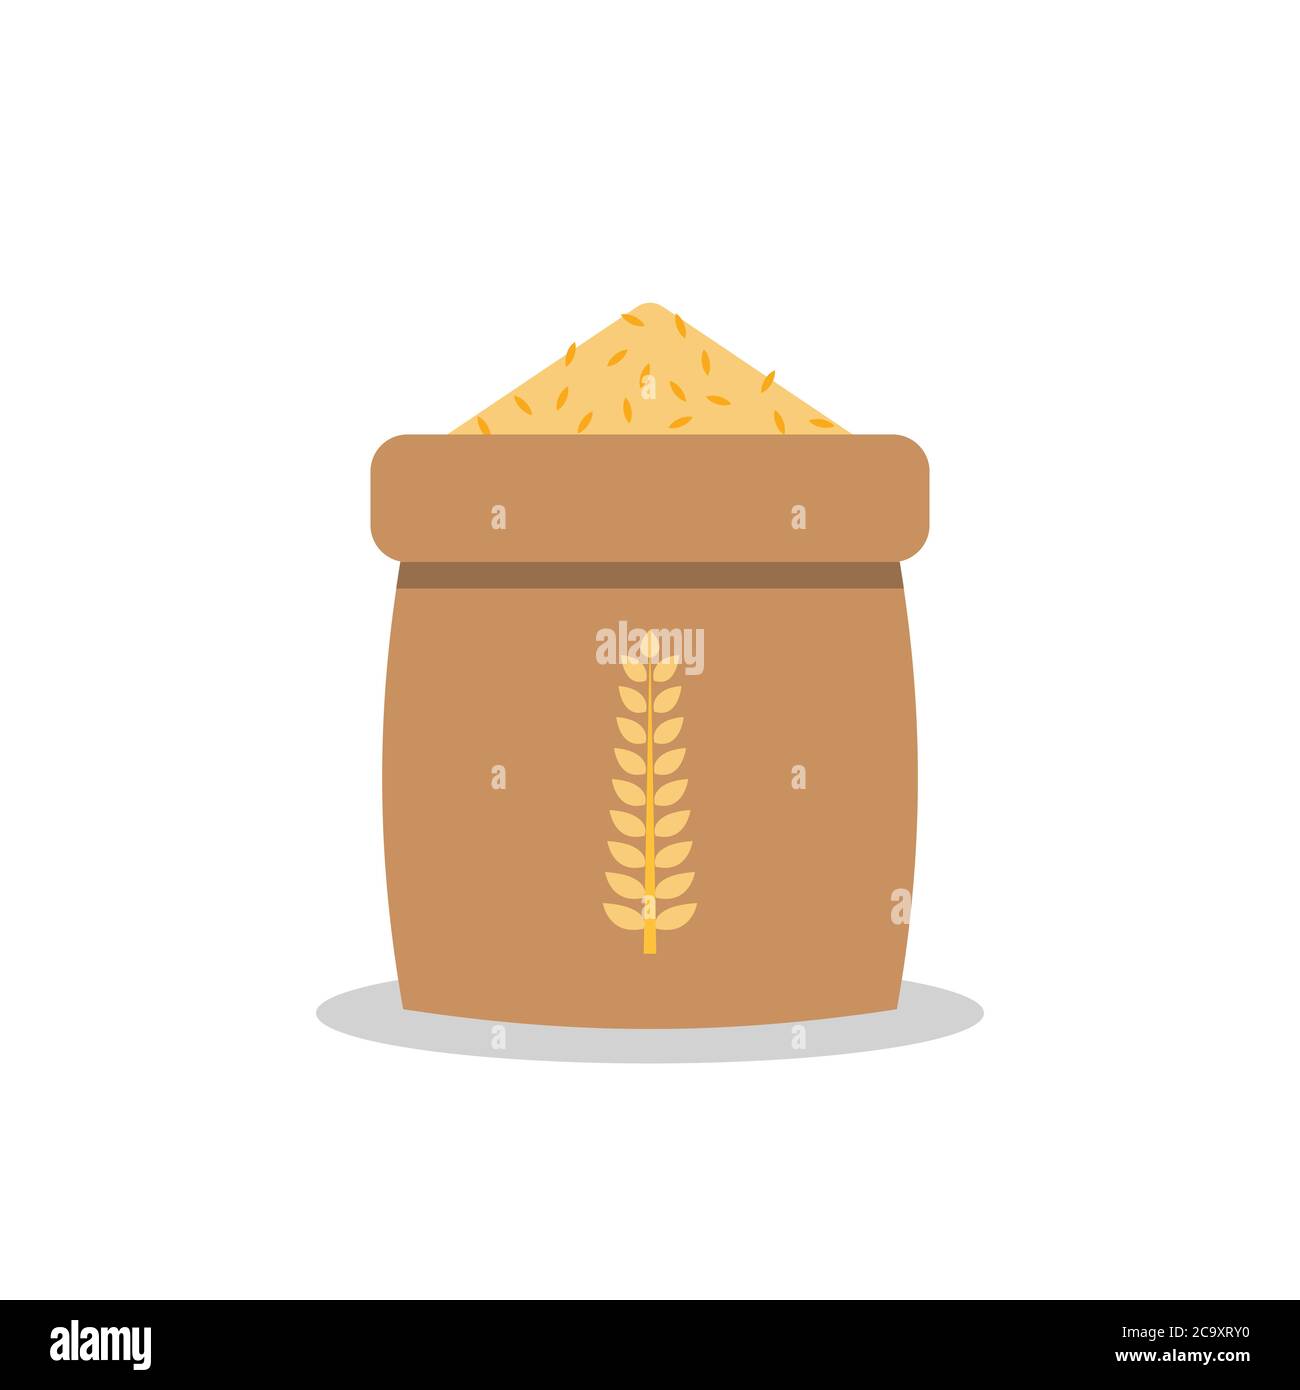 Rice sack icon in flat style. Vector illustration Stock Vector